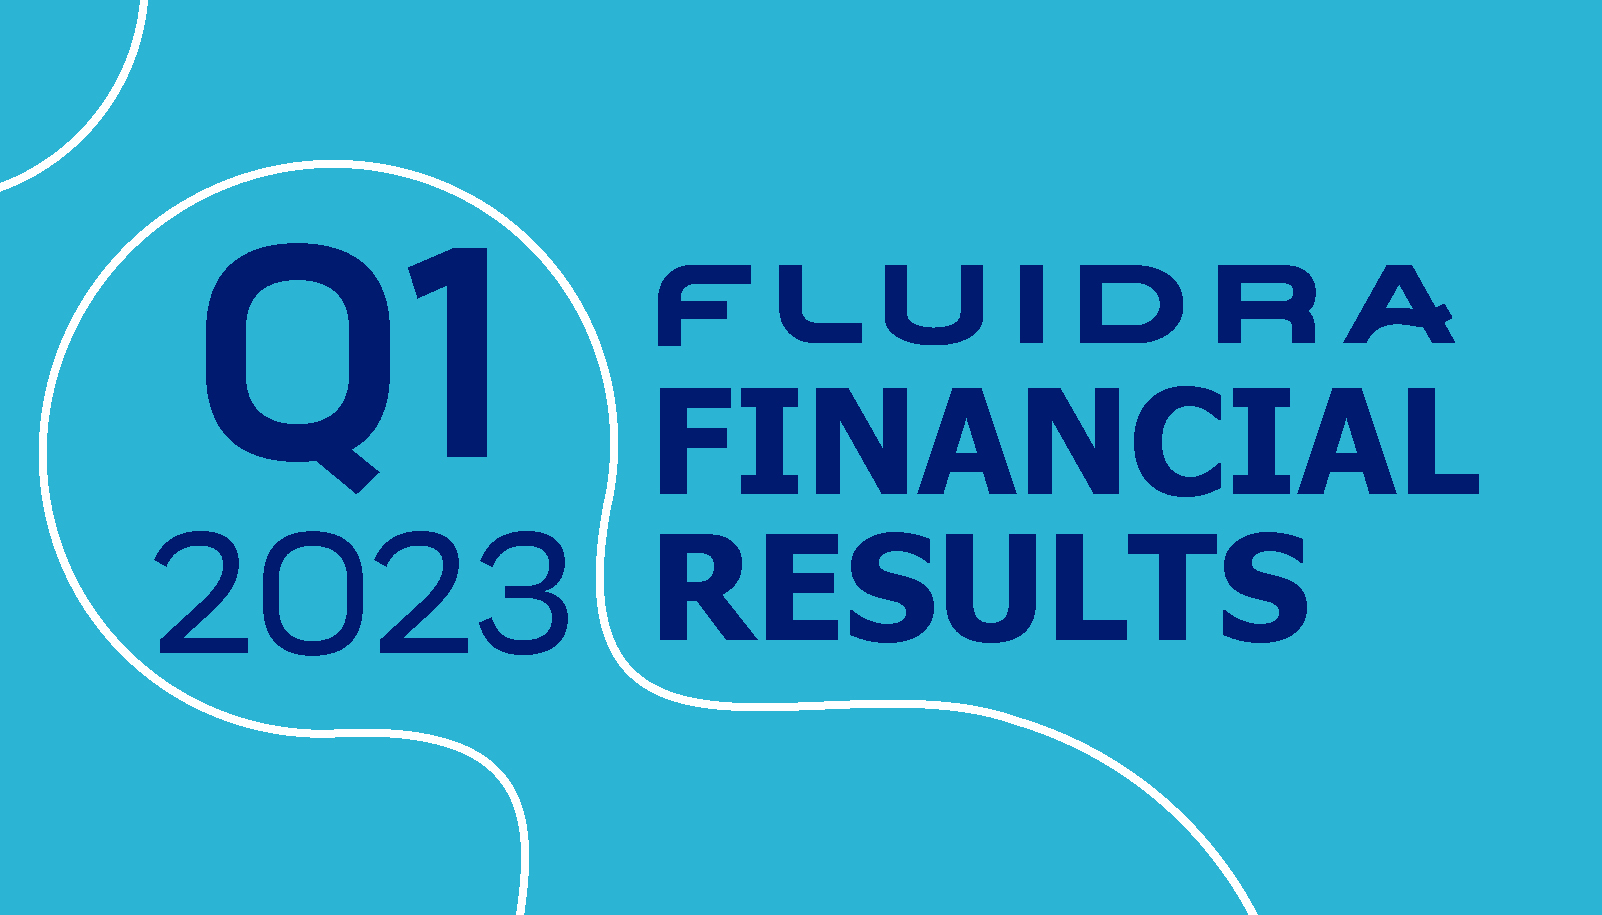 Fluidra achieves sales of €554 million in the first quarter and maintains its 2023 guidance